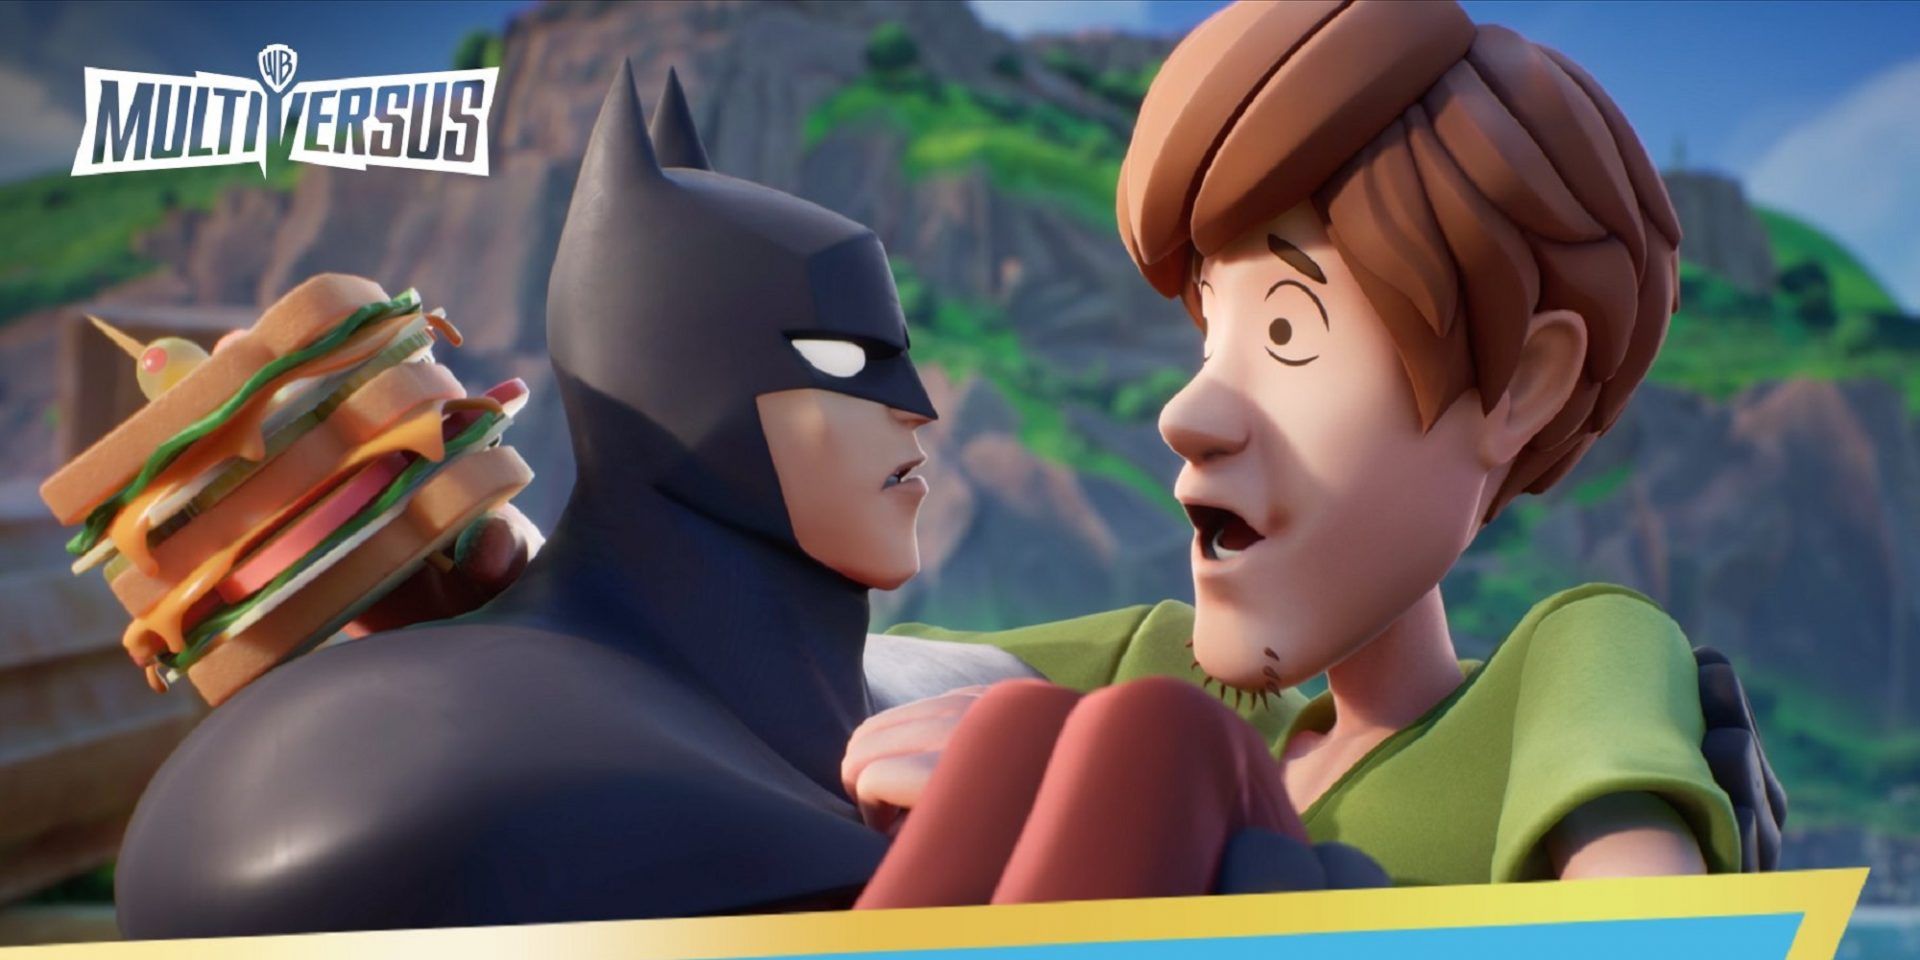 Batman Carrying Shaggy From The MultiVersus Trailer